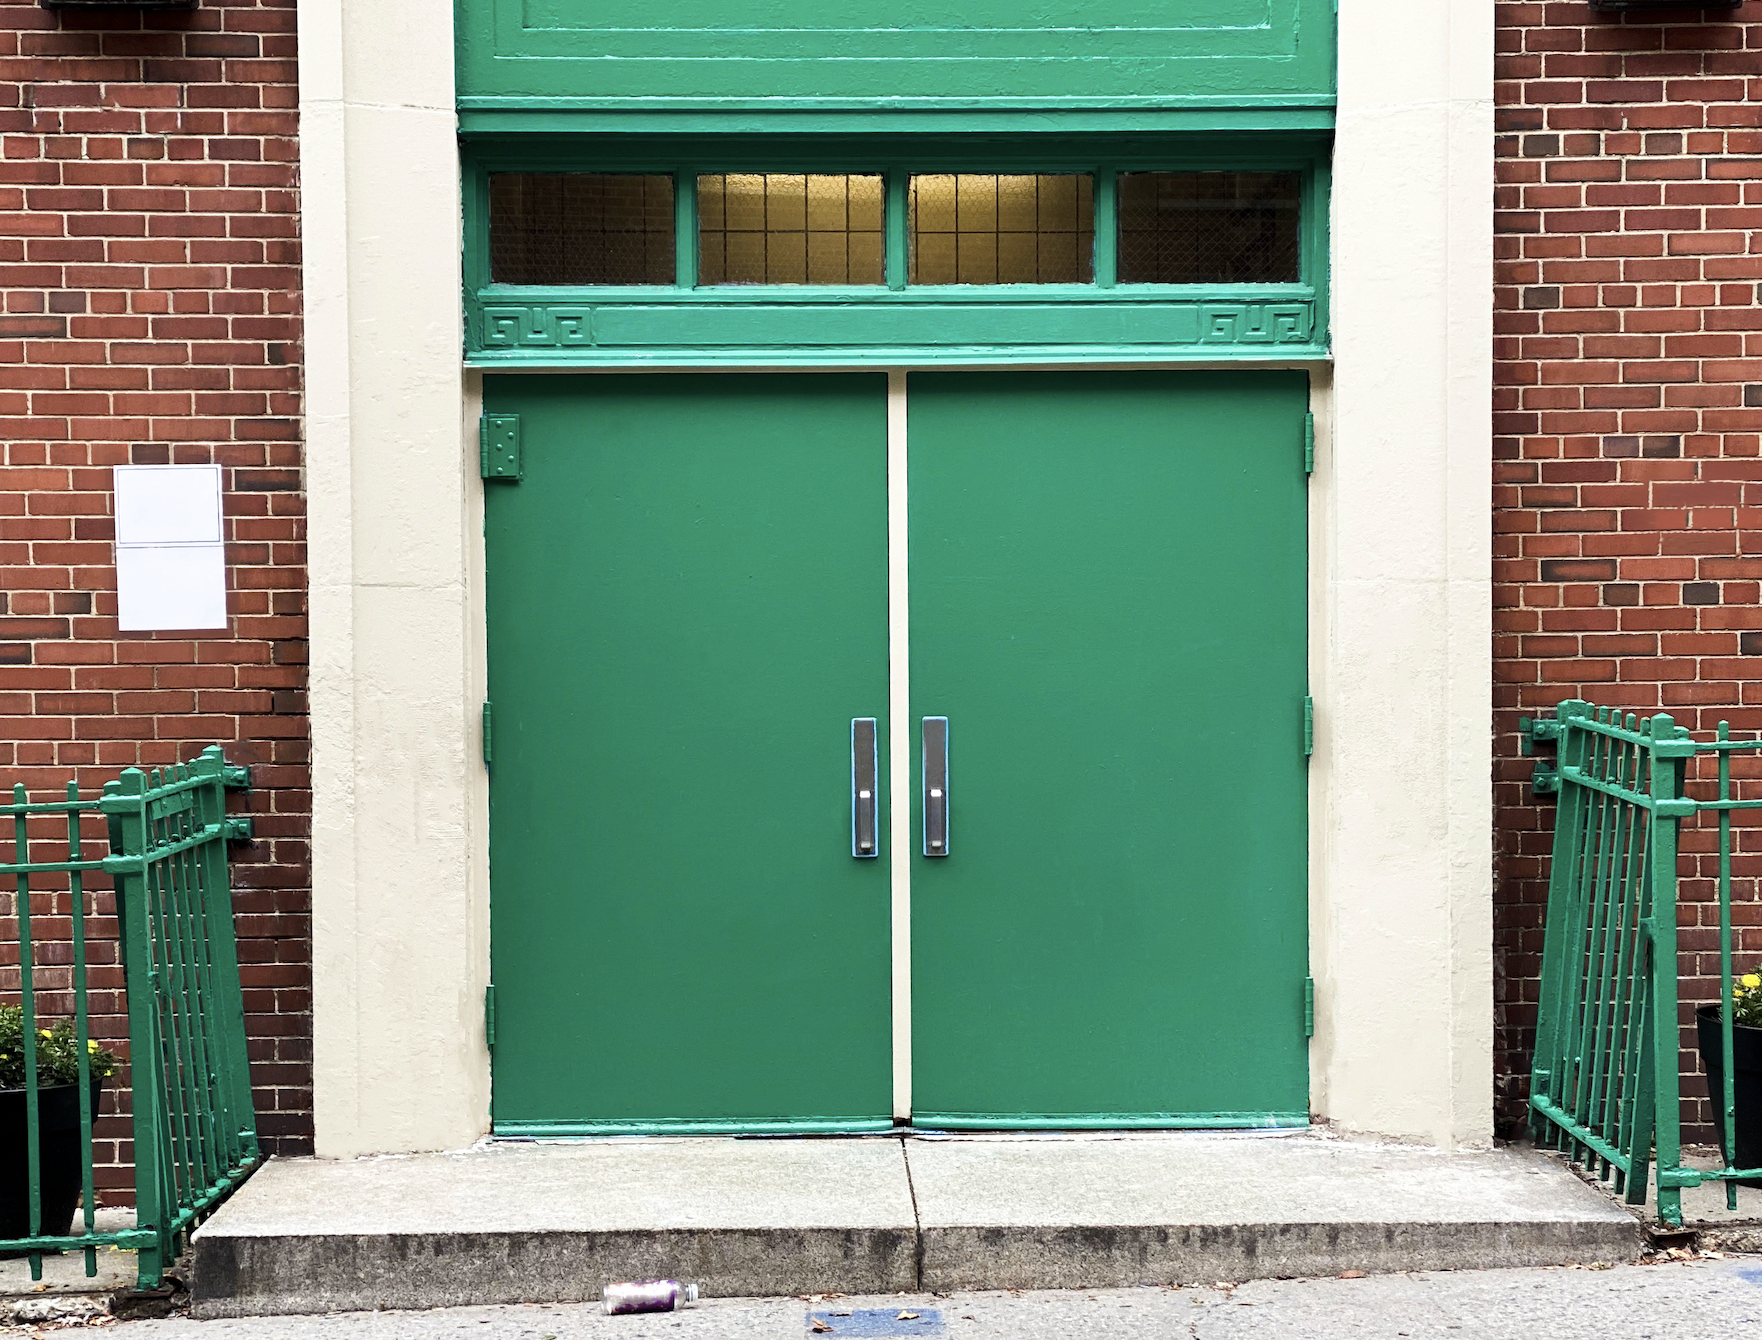 Double doors with metal handles on a brick building, indicating a formal entrance or workplace